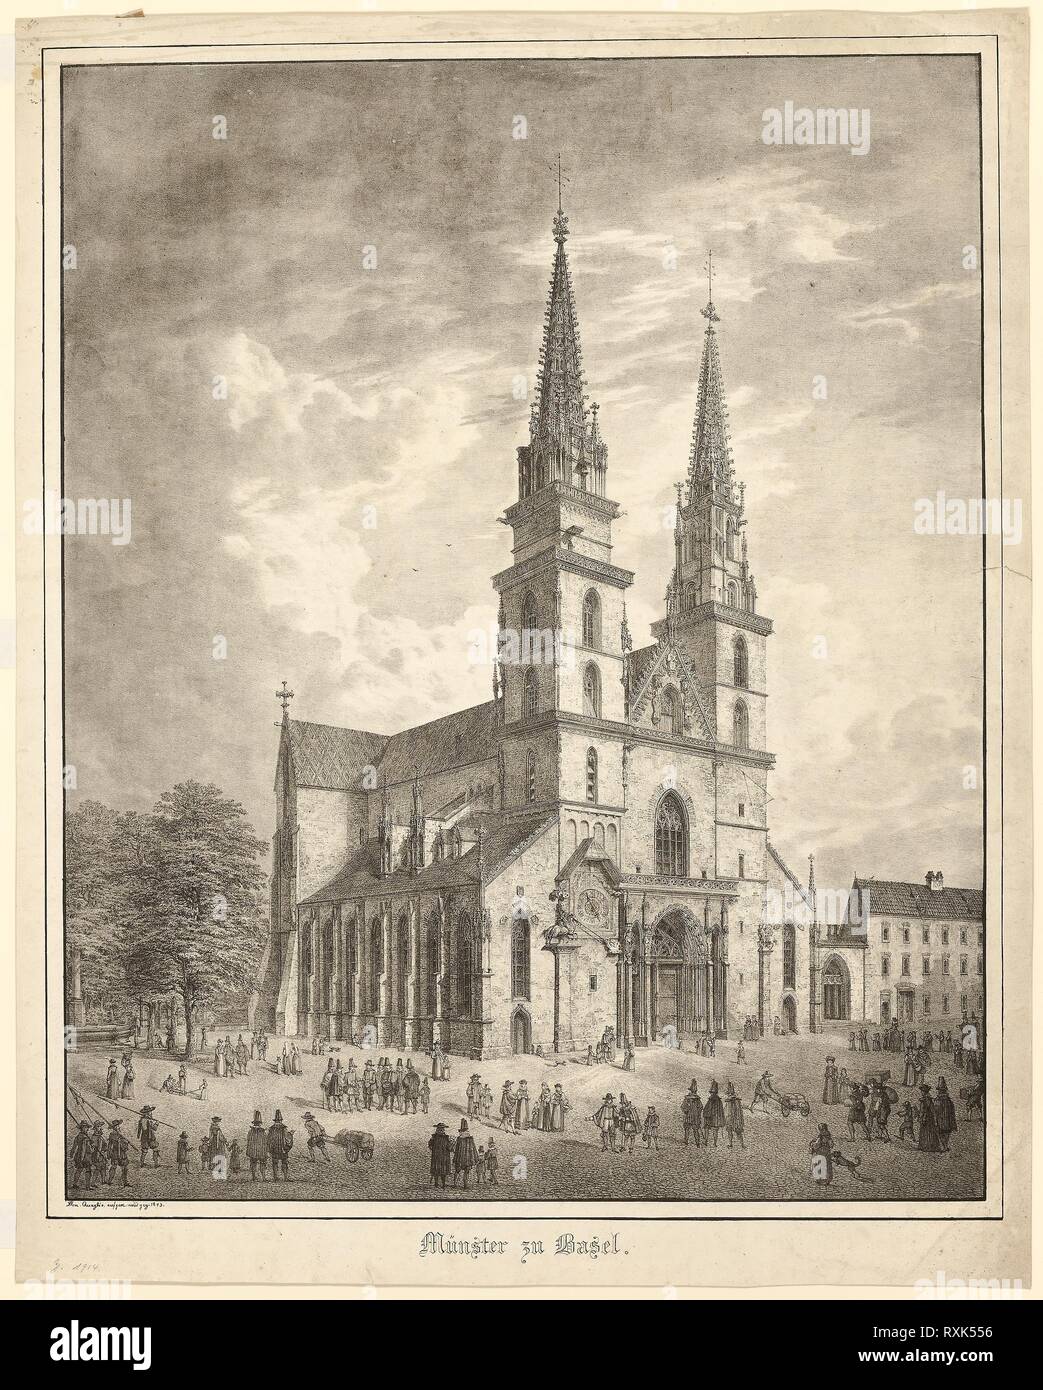 Münster zu Basel. Domenico Quaglio II; German, 1787-1837. Date: 1823. Dimensions: 614 x 492 mm (image); 683 x 545 mm (sheet). Lithograph on paper. Origin: Germany. Museum: The Chicago Art Institute. Stock Photo